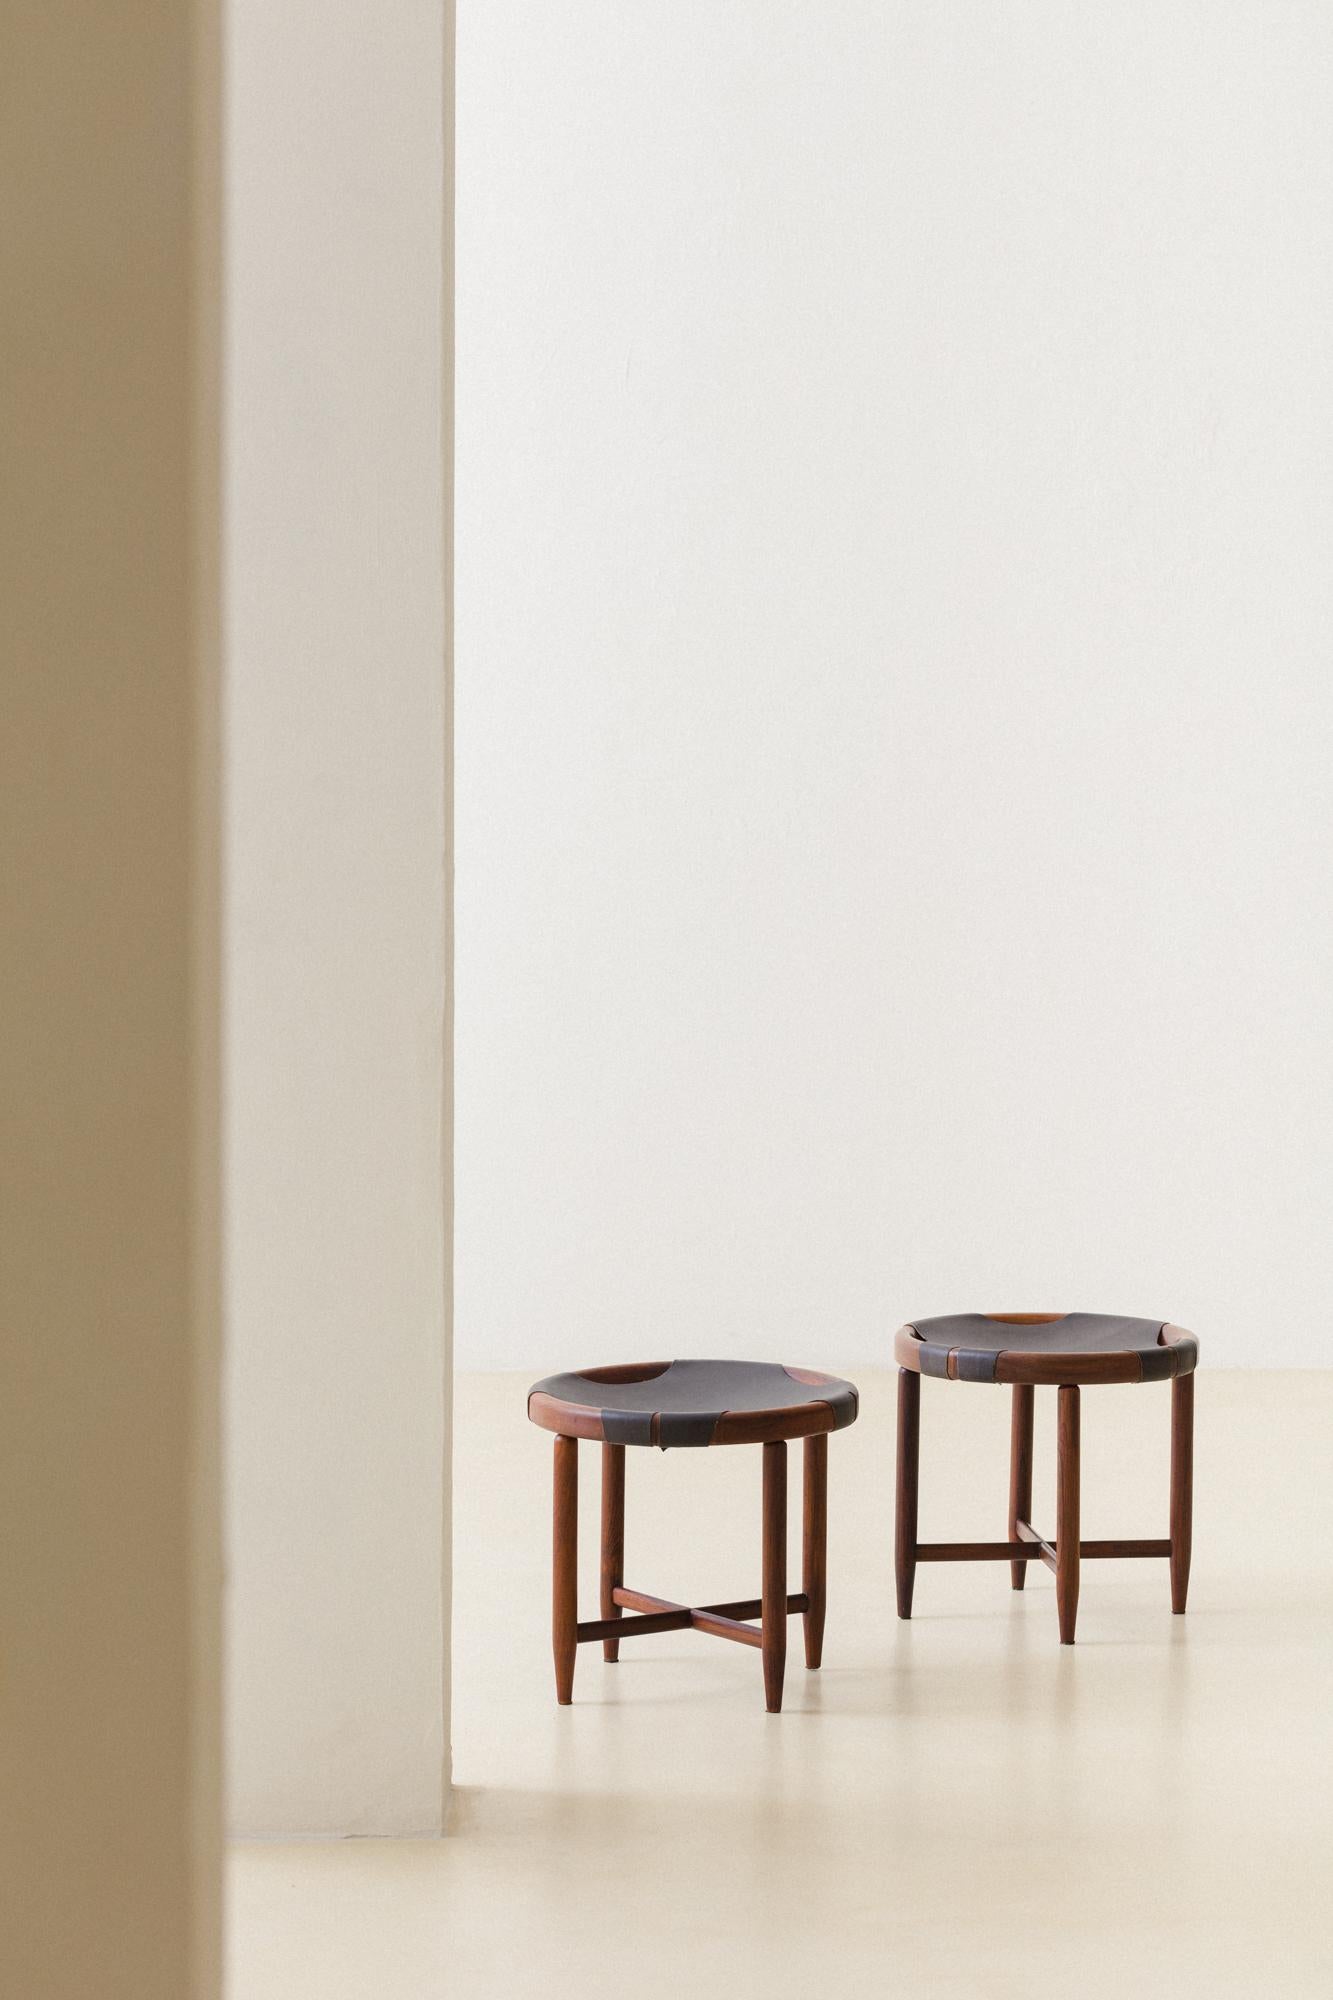 This pair of stools made in solid rosewood was produced by Cantù Móveis e Interiores Ltda. in the 1960s.

The piece in solid Rosewood is turned with rounded edges and pointy feet. The seatings are made of black leather.

Architects Jorge Jabour